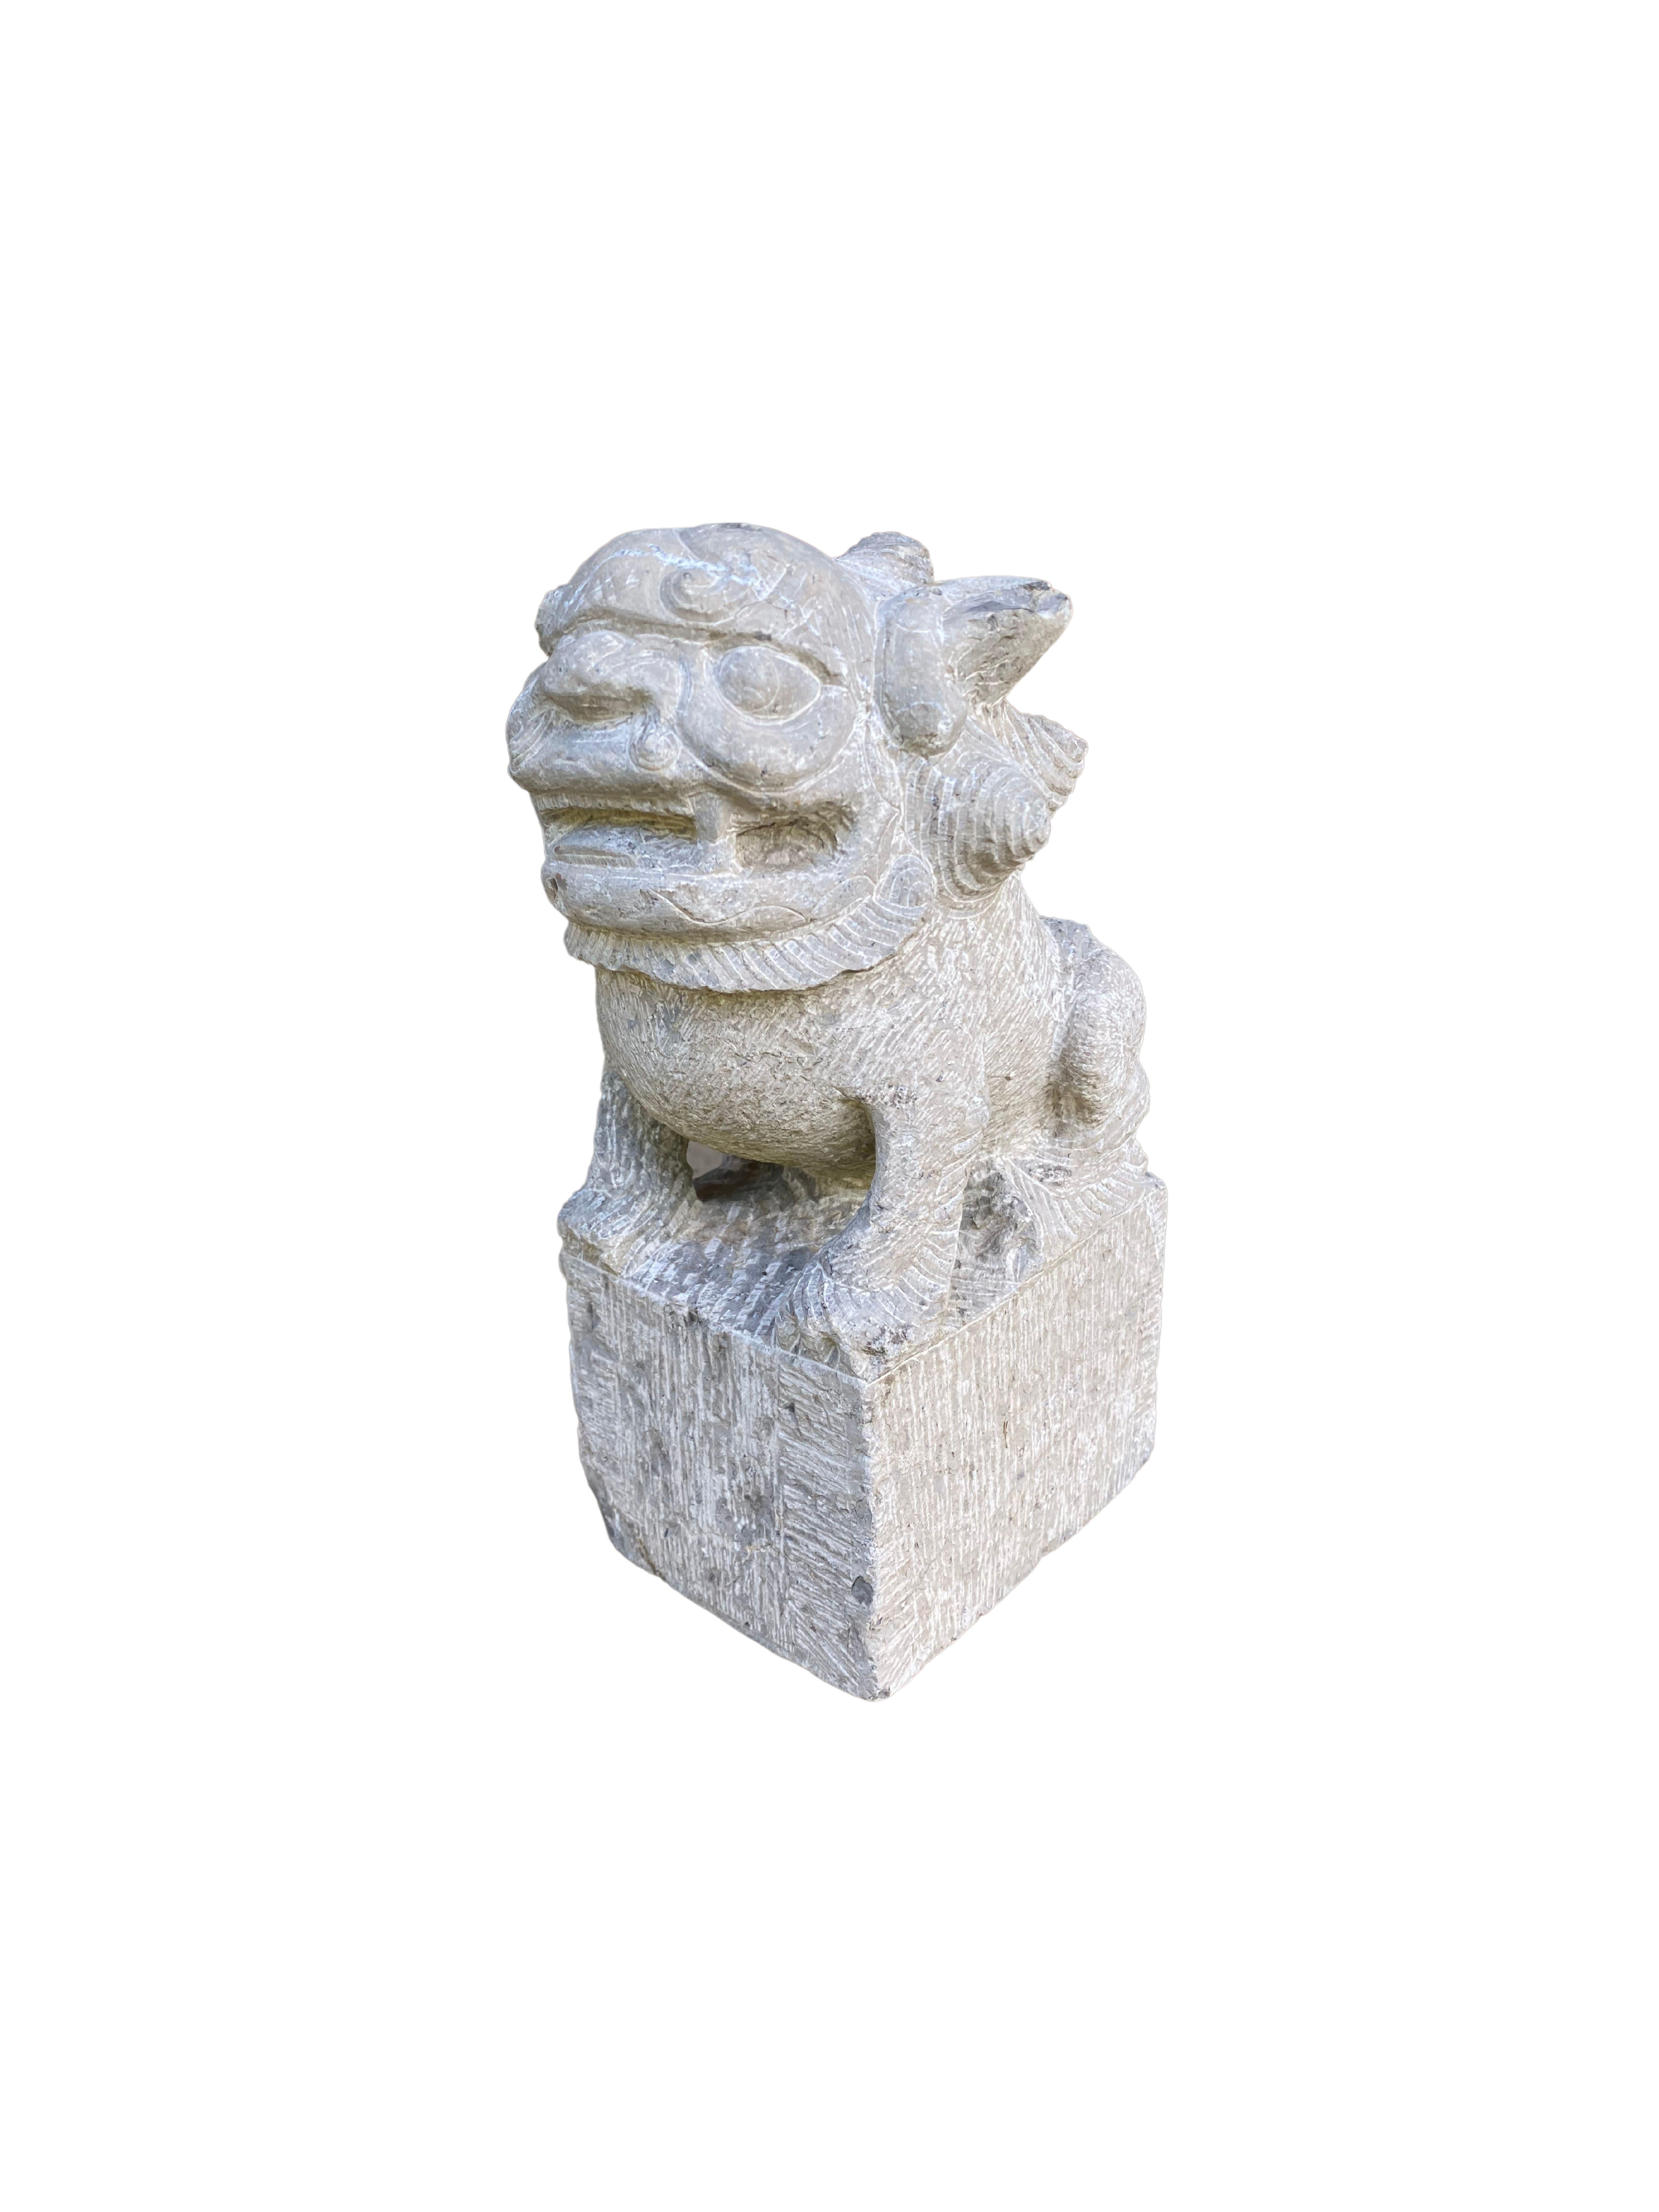 Qing Limestone Fu Dog Guardian Figure from China, c. 1900 For Sale